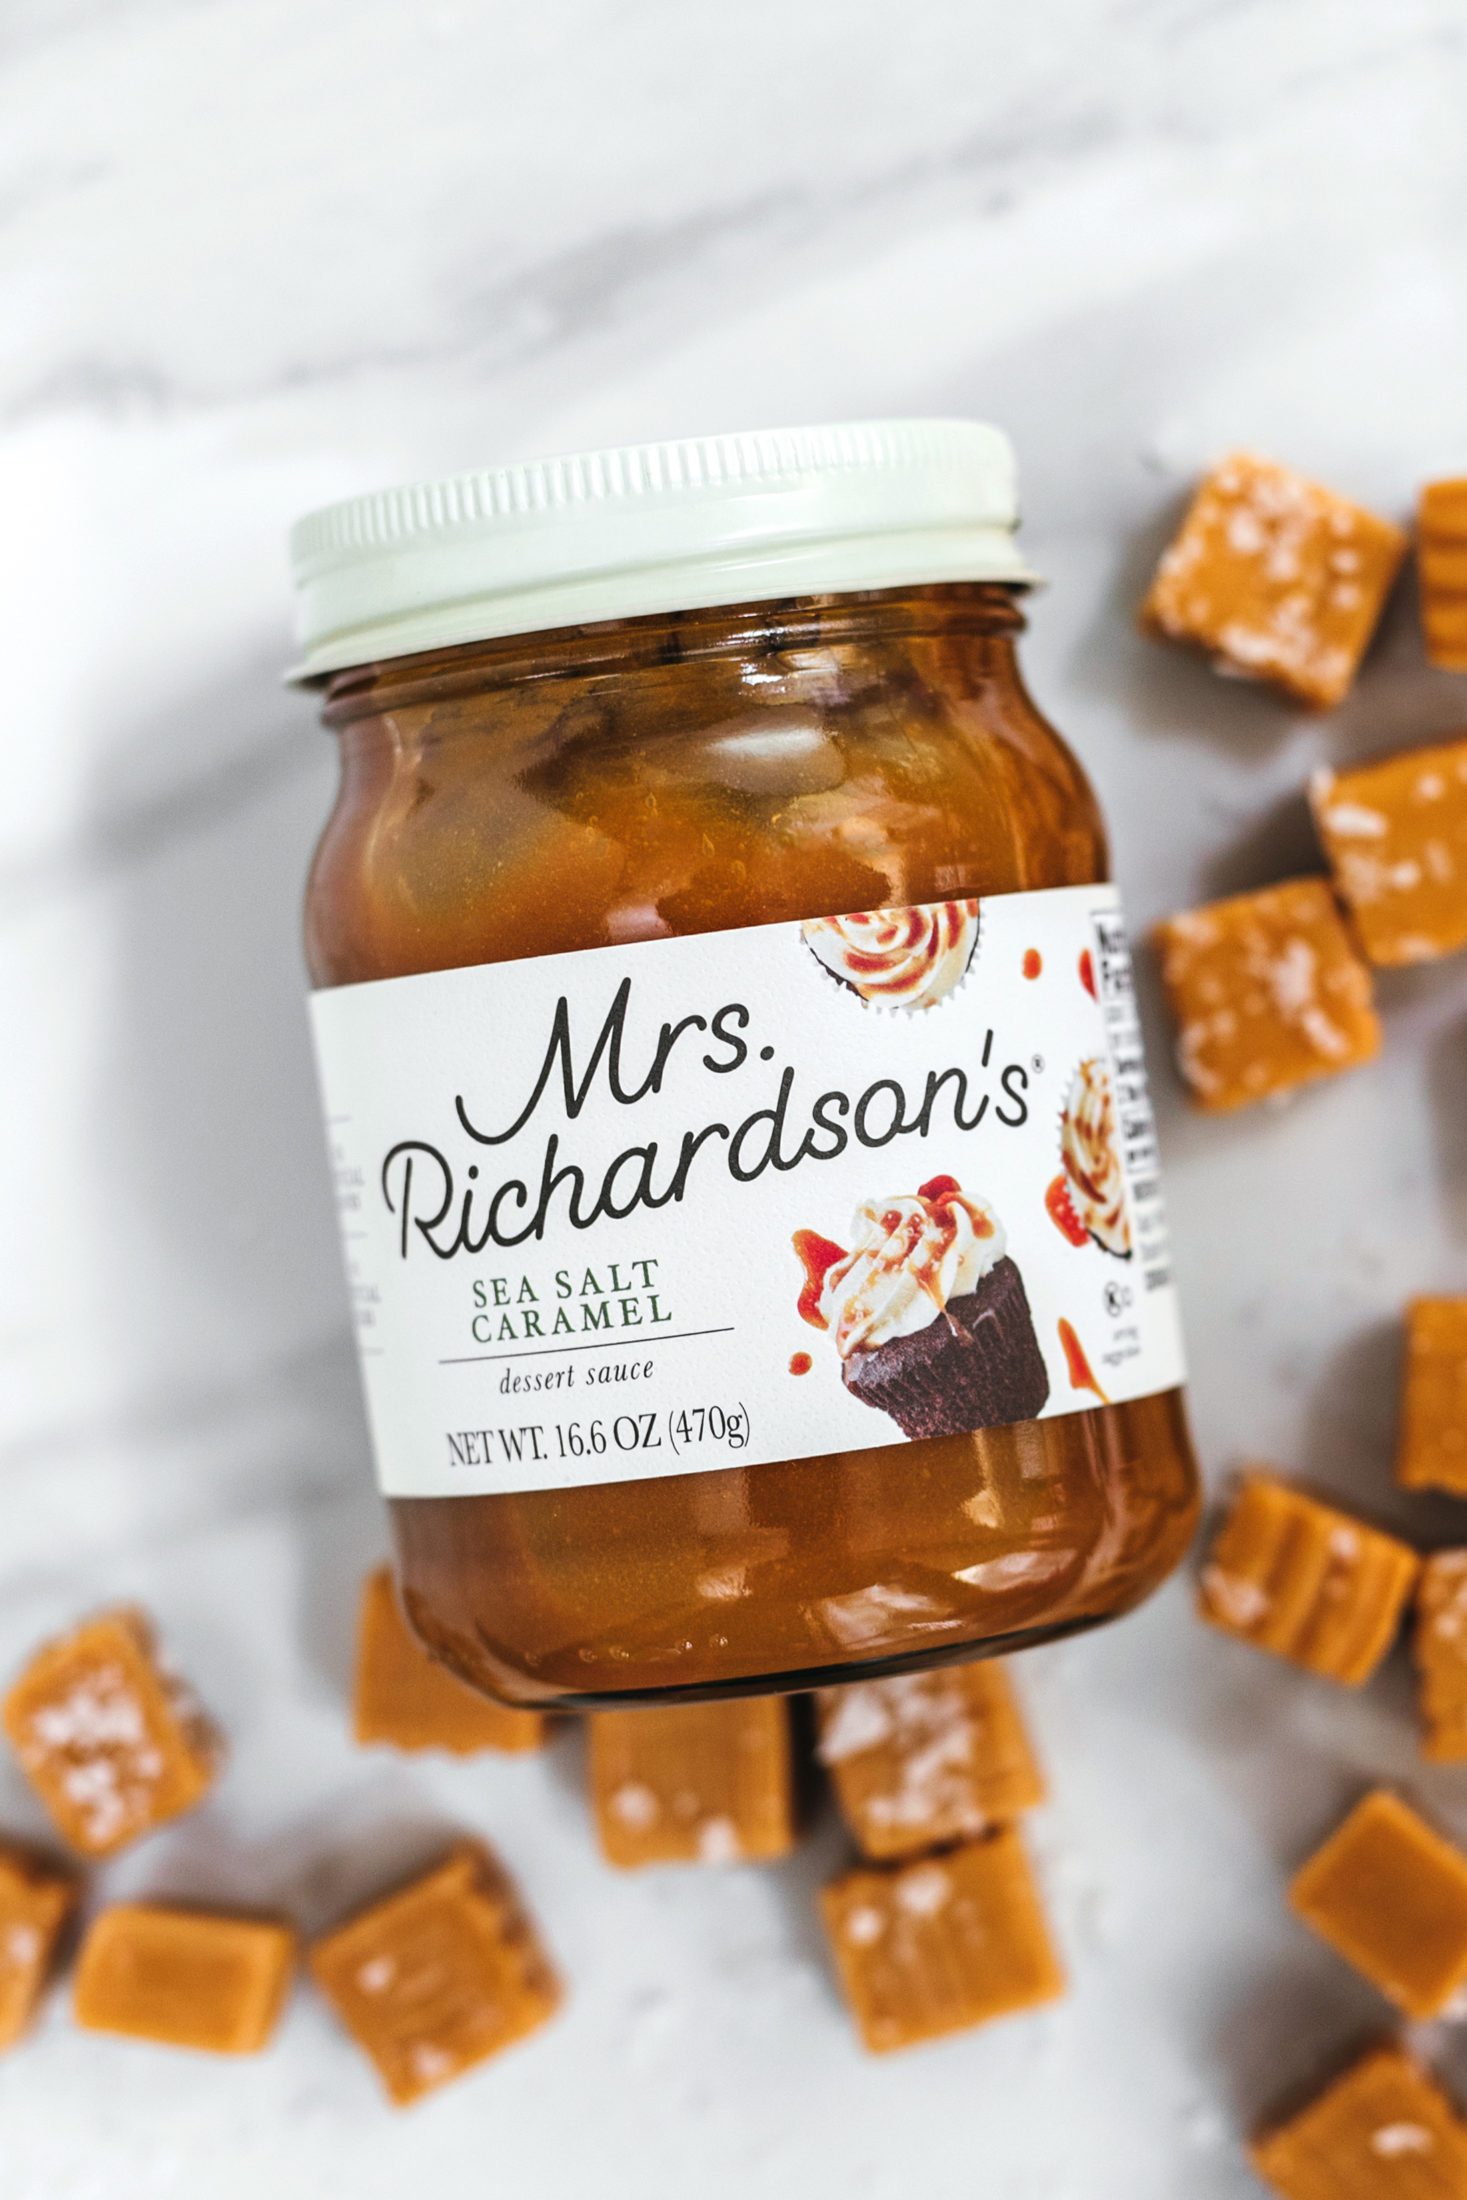 An overhead view of new Mrs. Richardson's cream label design using a clear glass jar with cream white lid. Sea Salt Caramel dessert sauce jar with sea salt caramel squares scattered on a marble surface.